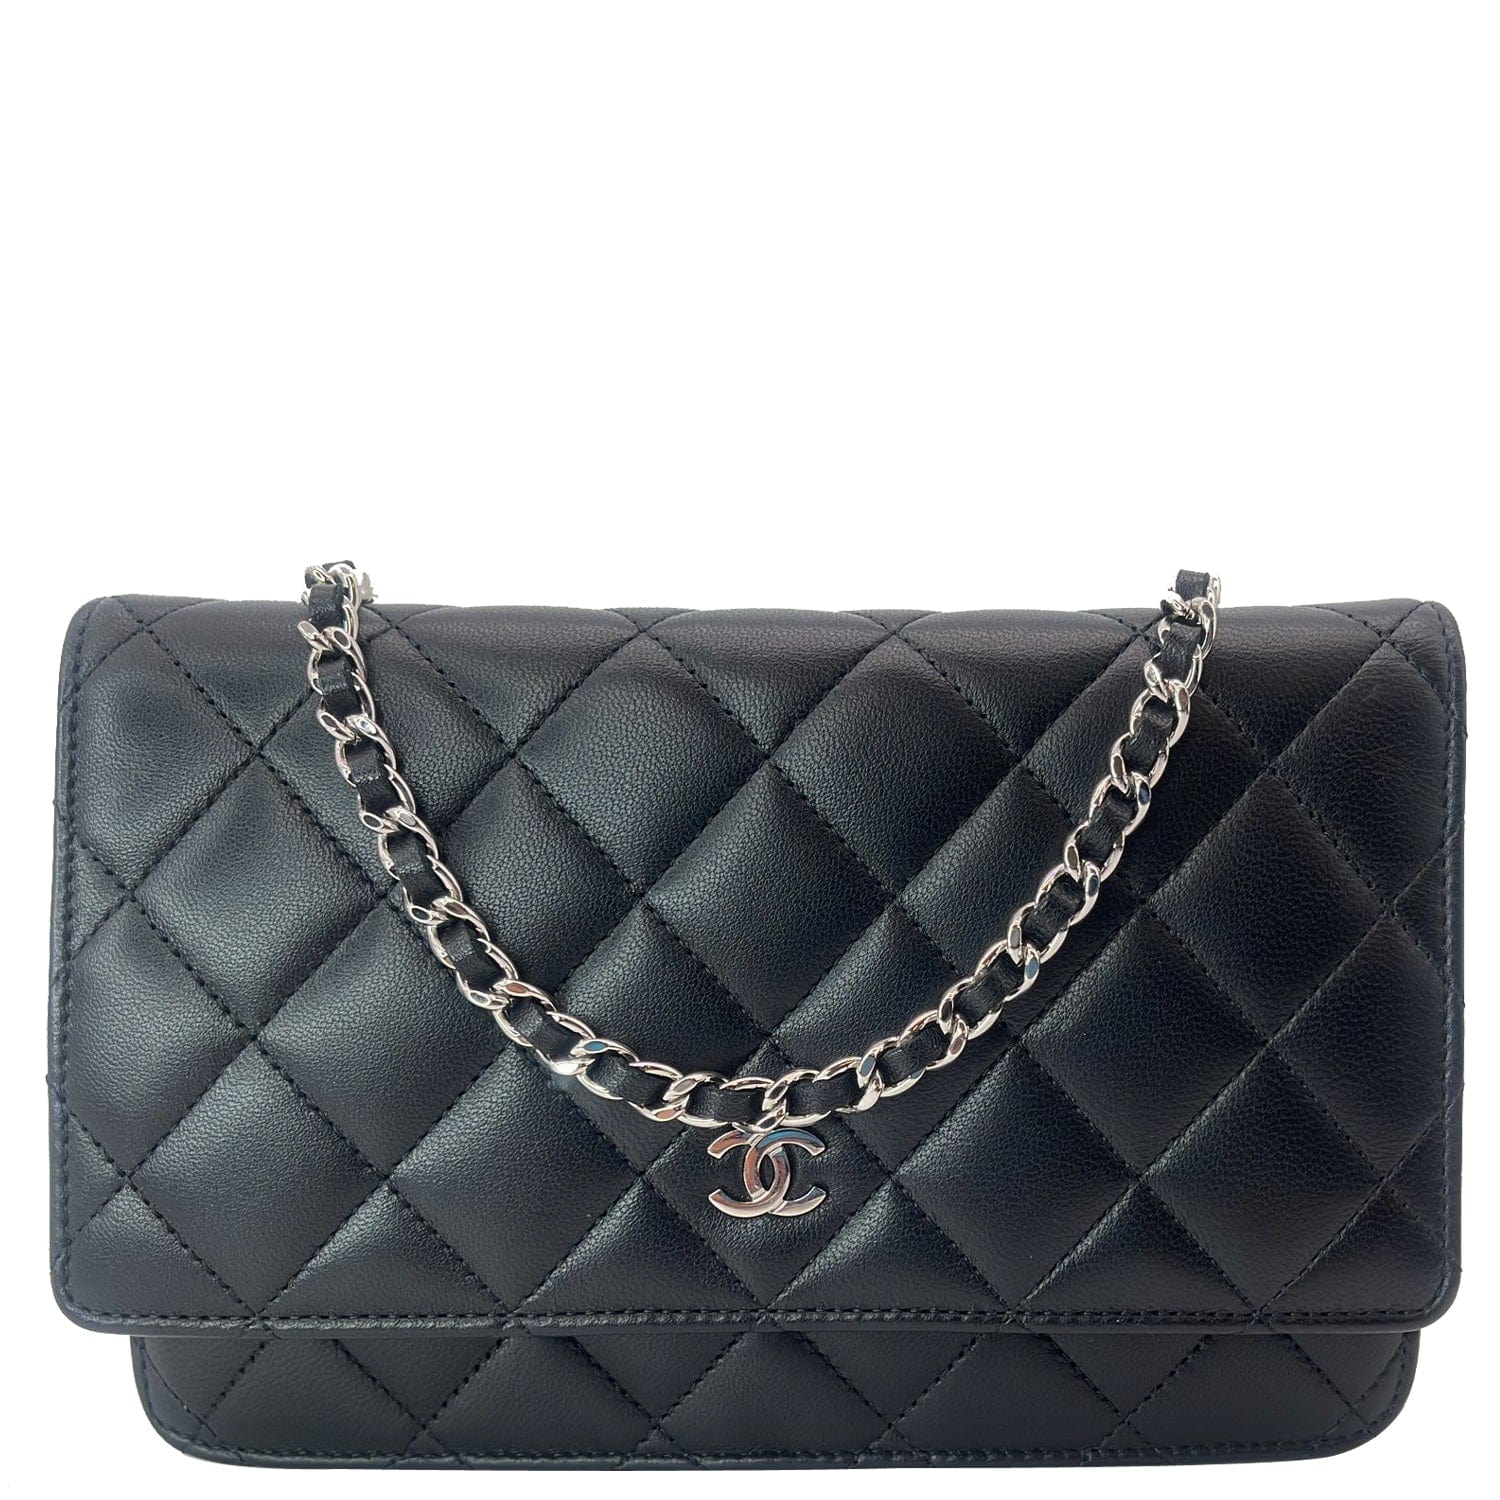 Buy Coco Chanel Bag Online In India -  India